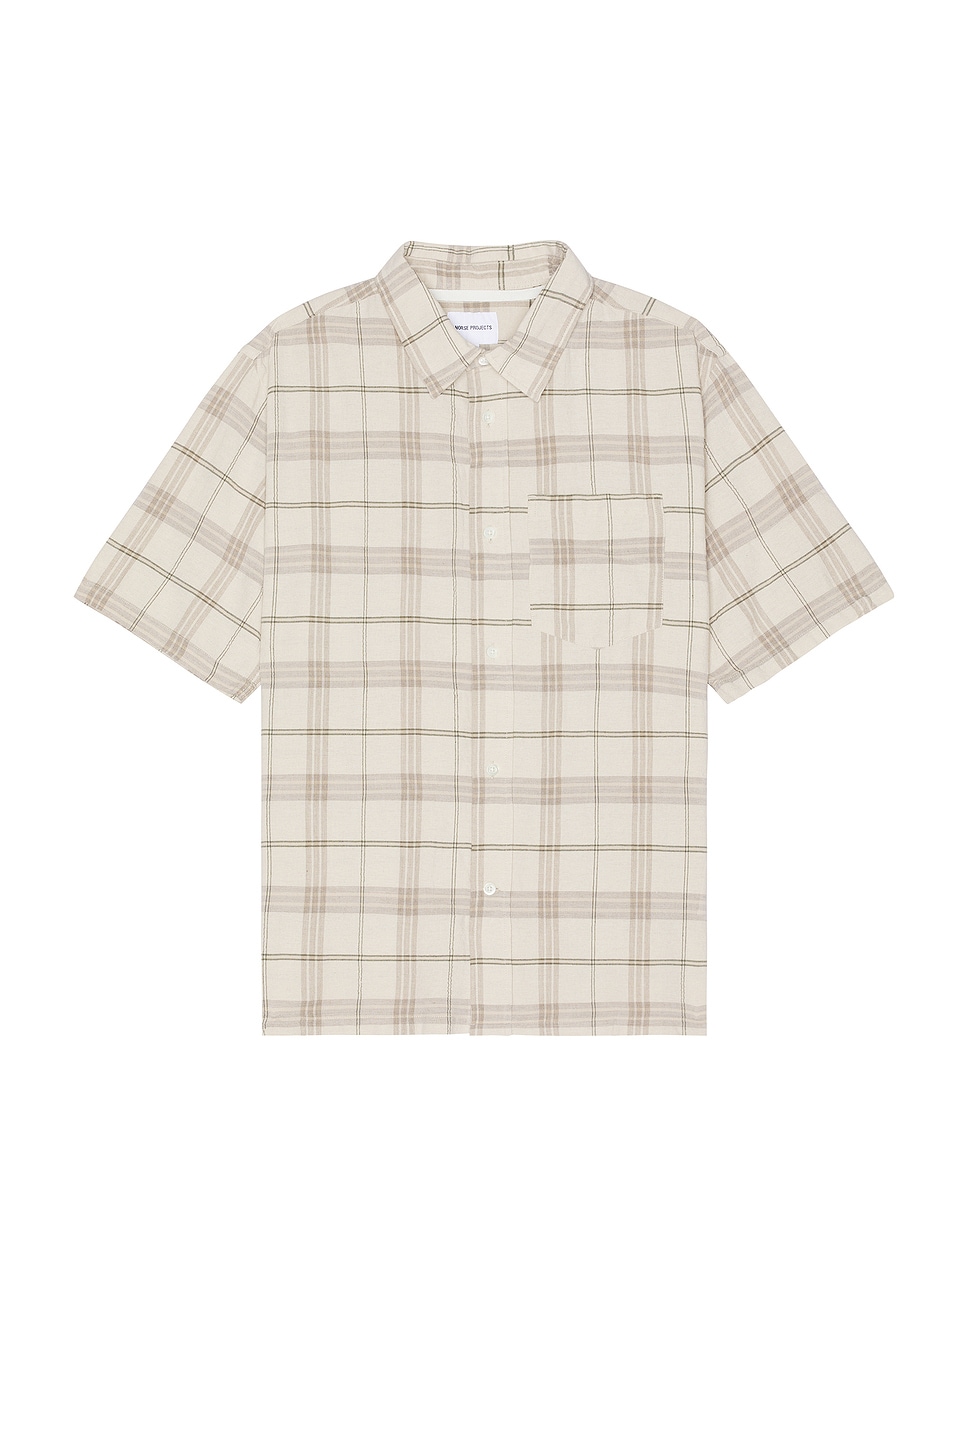 Image 1 of Norse Projects Ivan Relaxed Textured Check Short Sleeve Shirt in Oatmeal